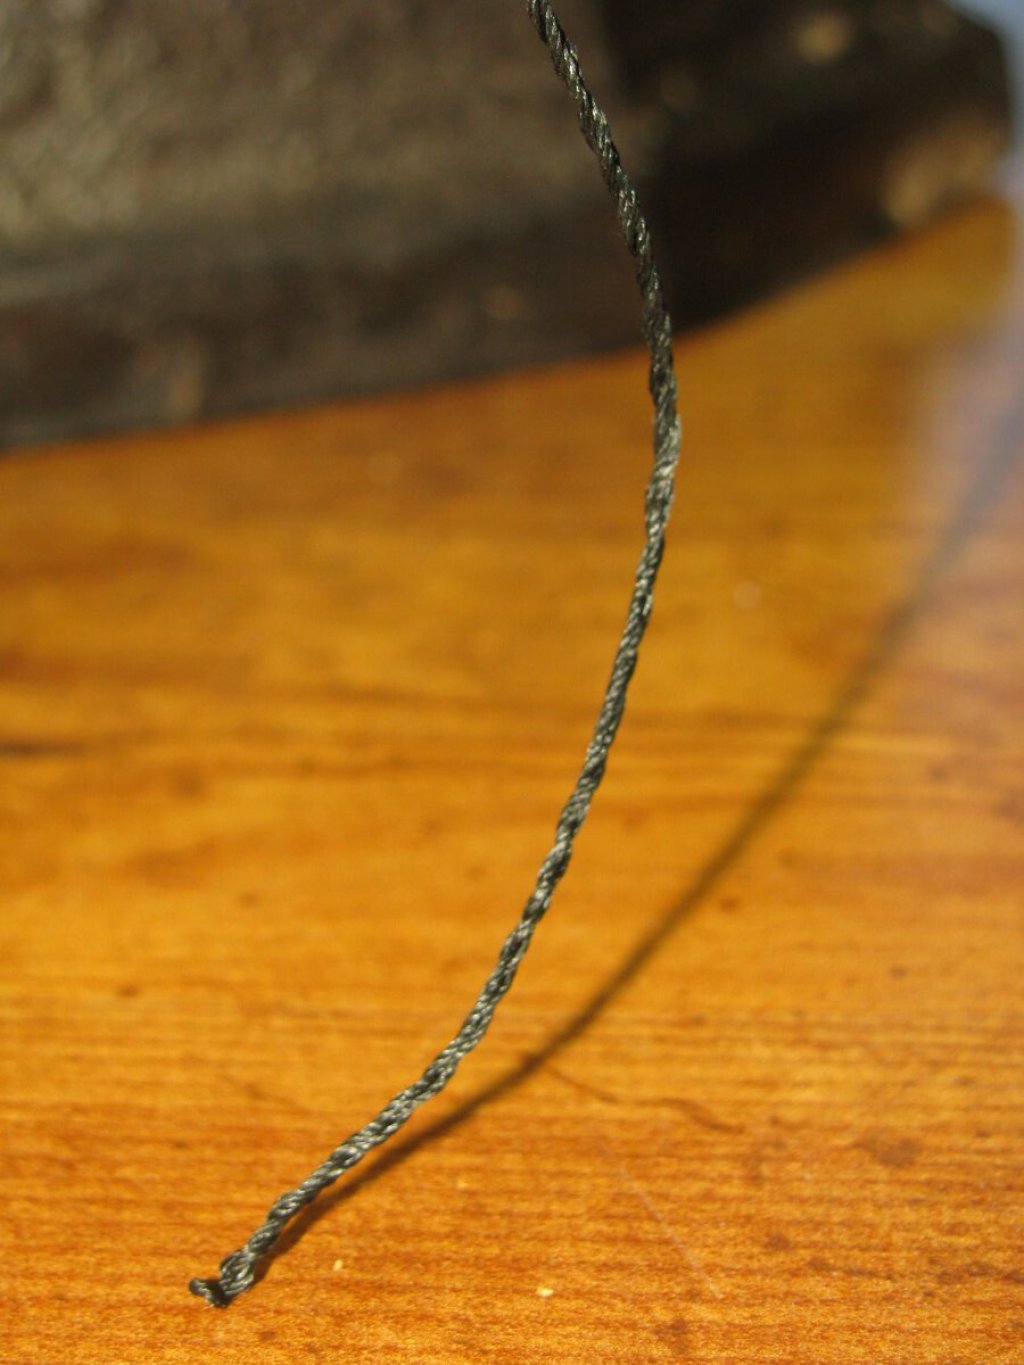 Fold the cord in half and allow it to twist around itself.